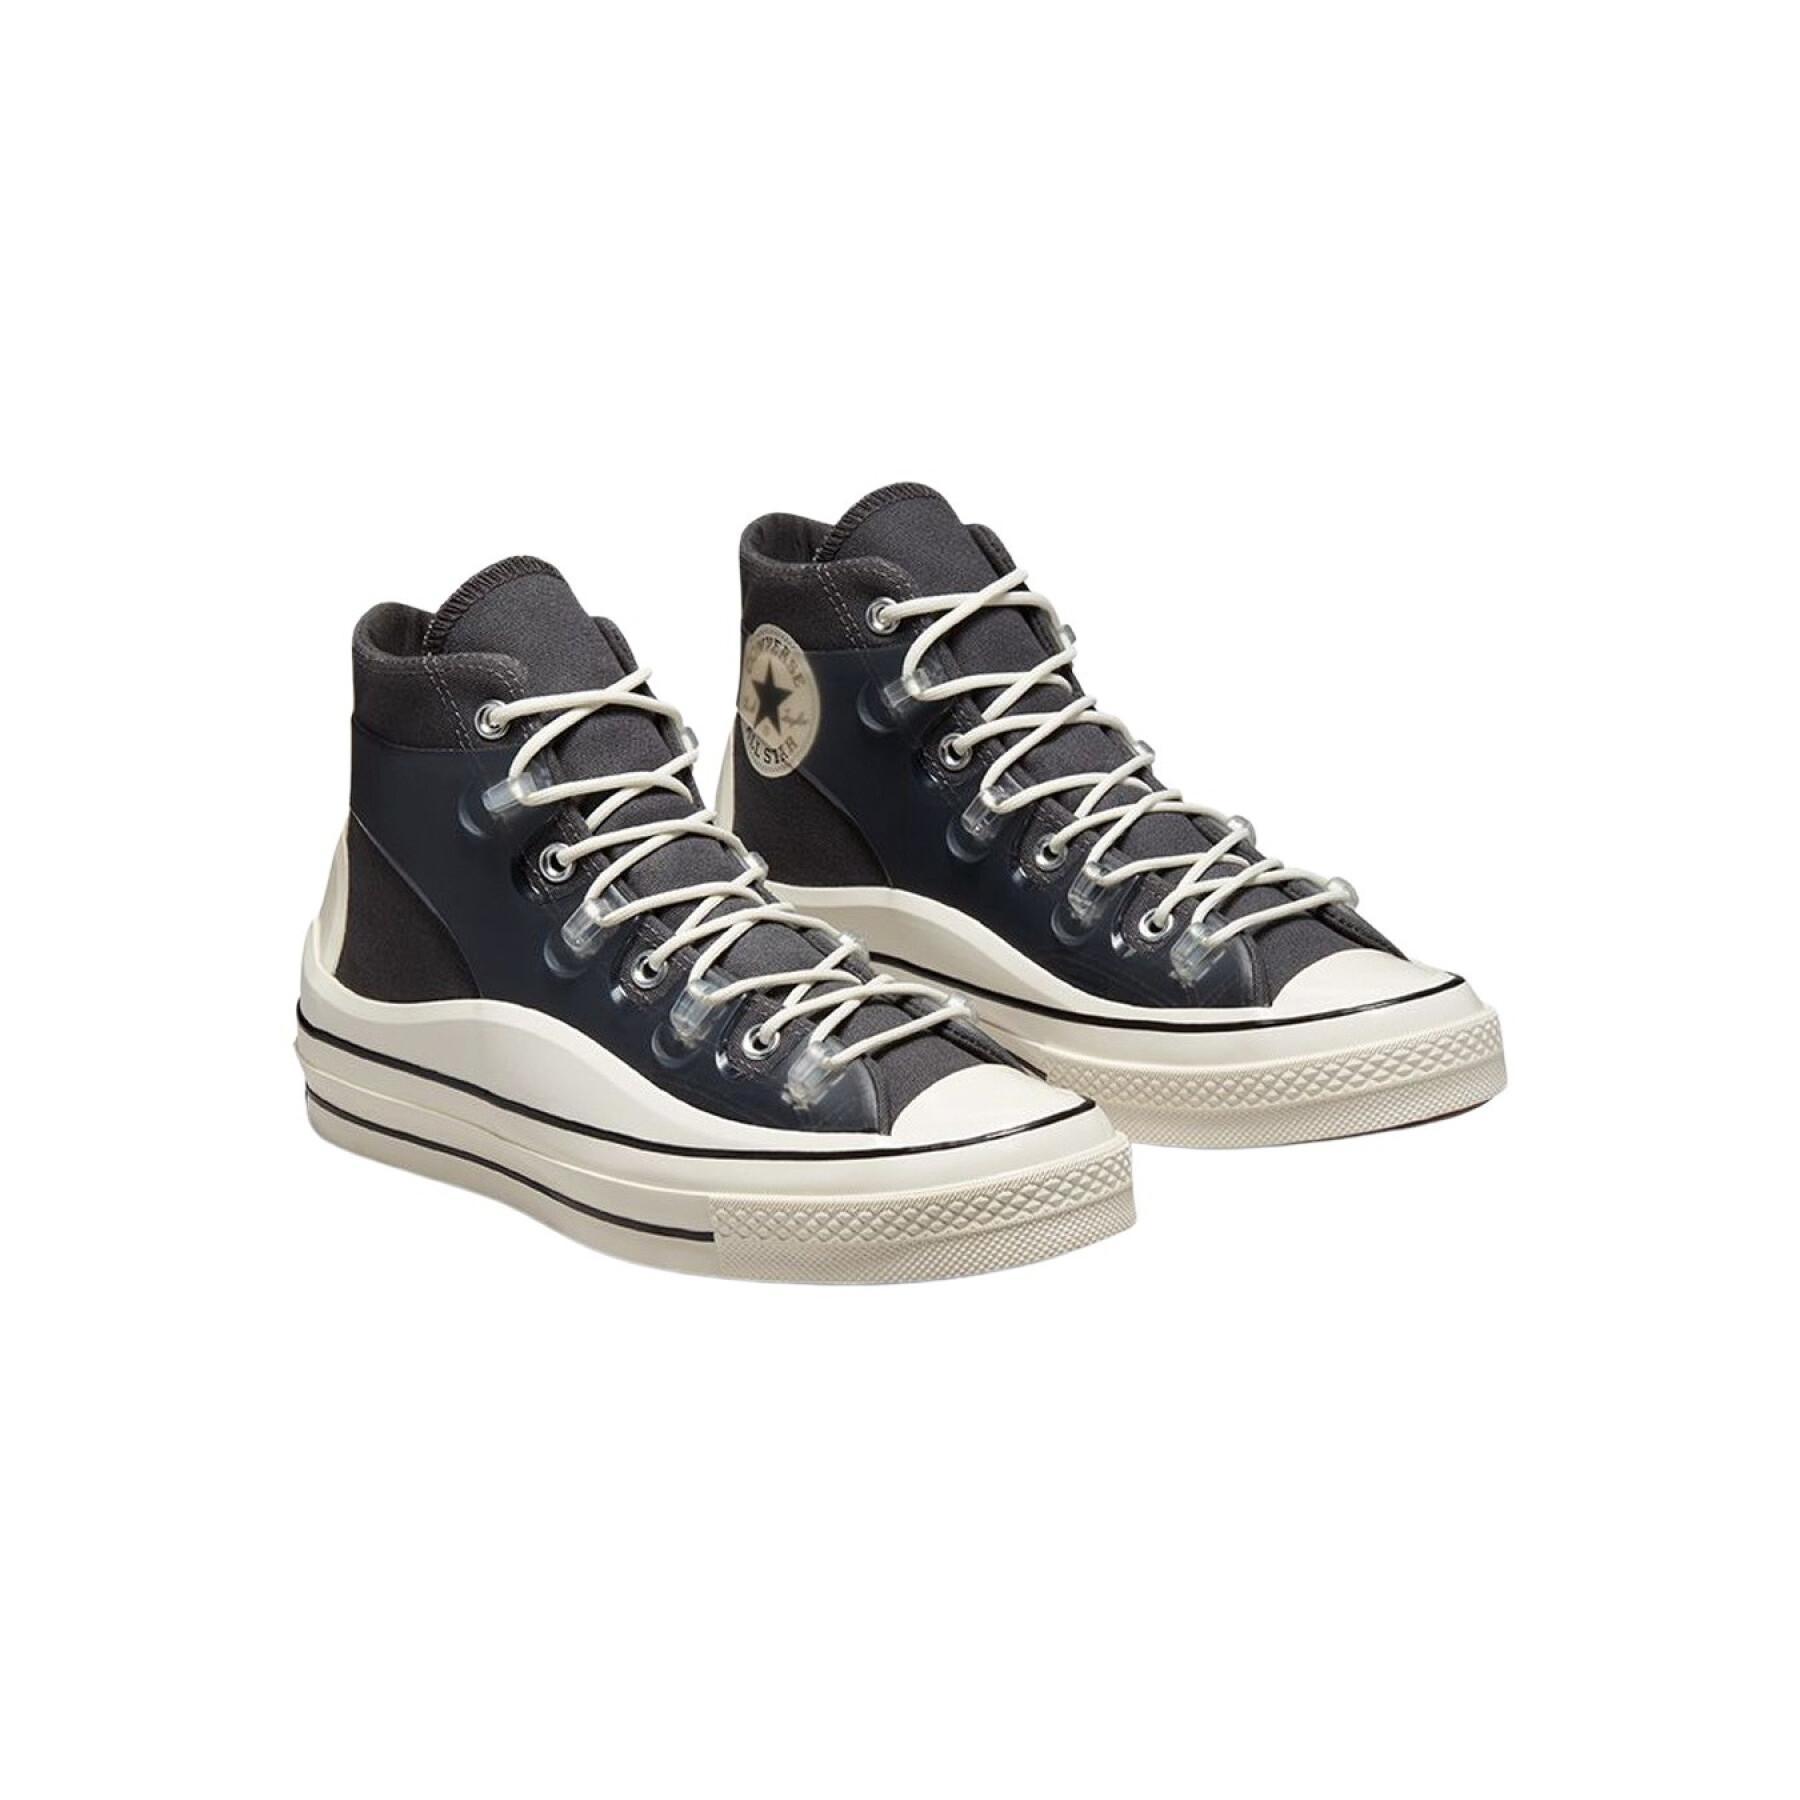 Sneakers Converse Chuck 70 Utility Translucent Overlay